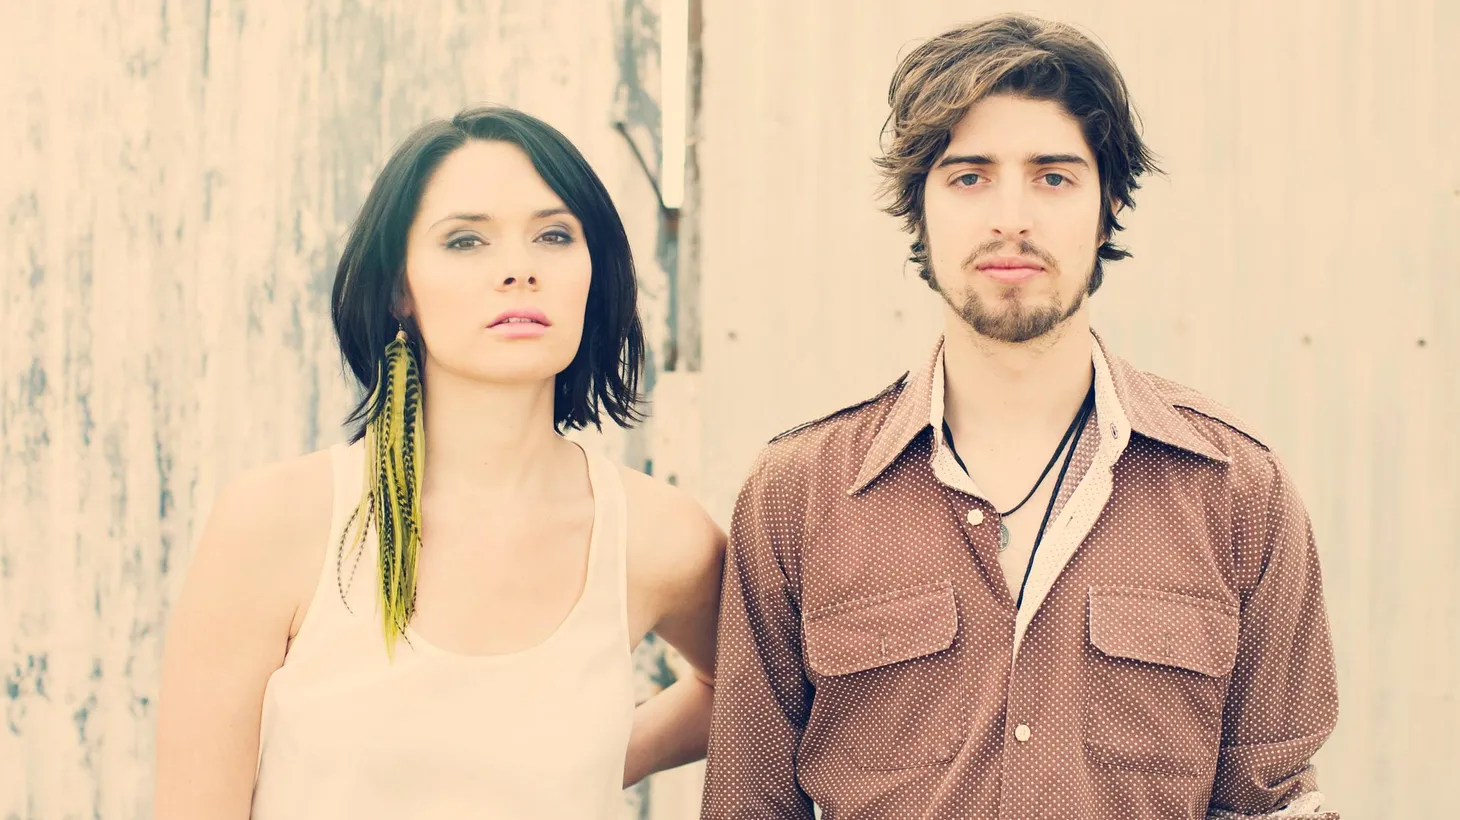 HoneyHoney is one of LA's most promising new bands. The duo sing Americana-tinged songs that reflect their love of cowboys and country...